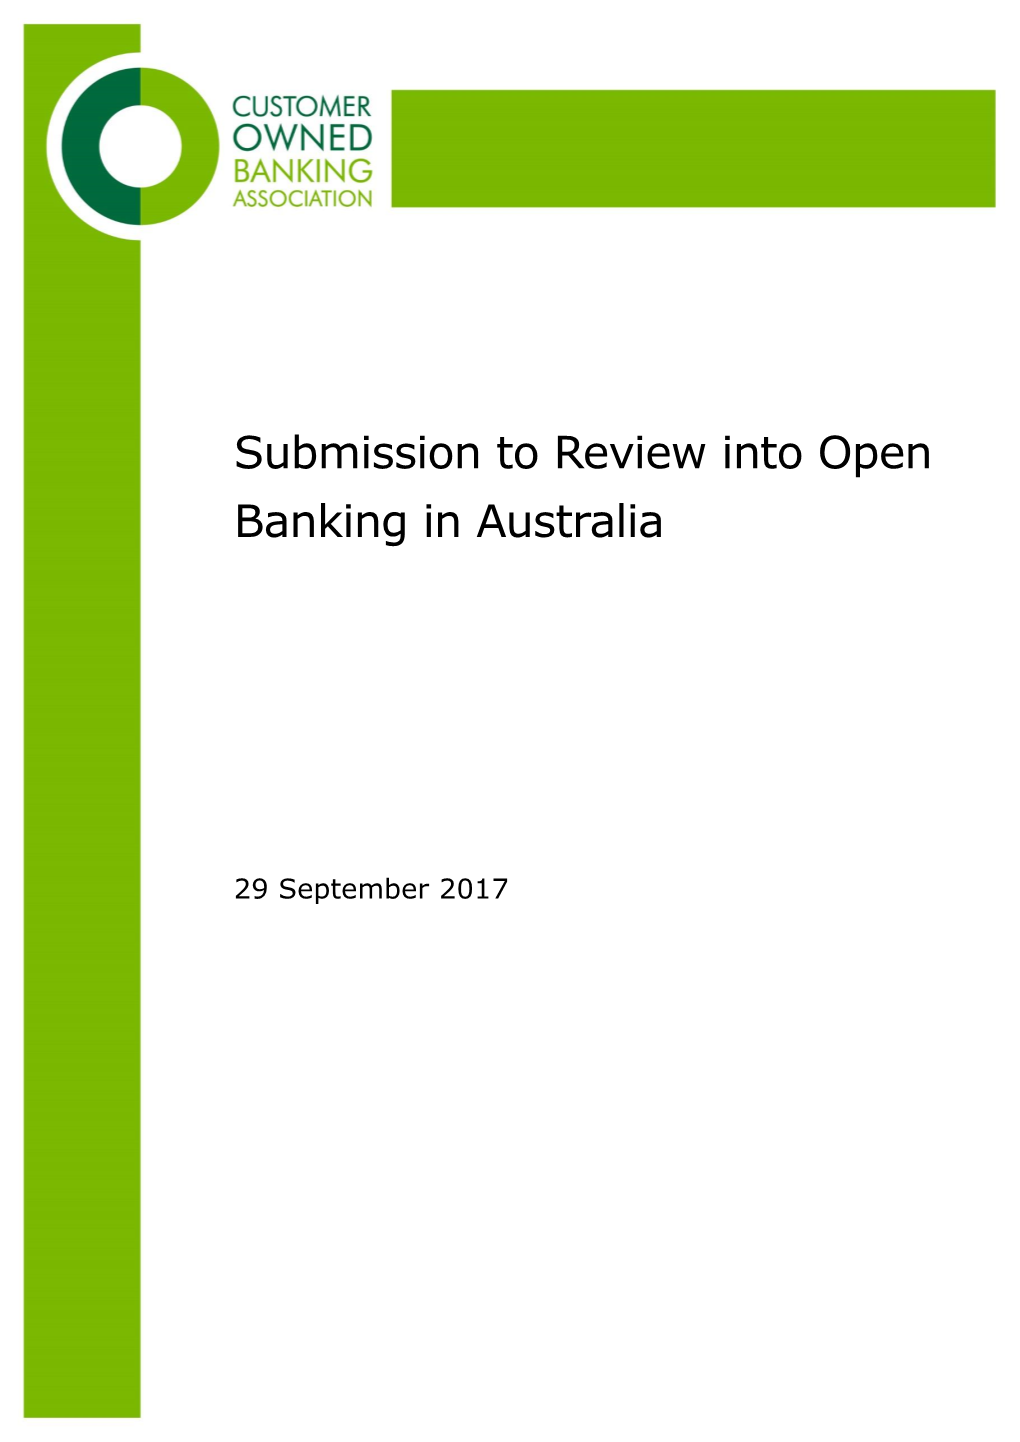 Customer Owned Banking Association (COBA) Is the Industry Advocate for Australia’S Customer Owned Banking Sector